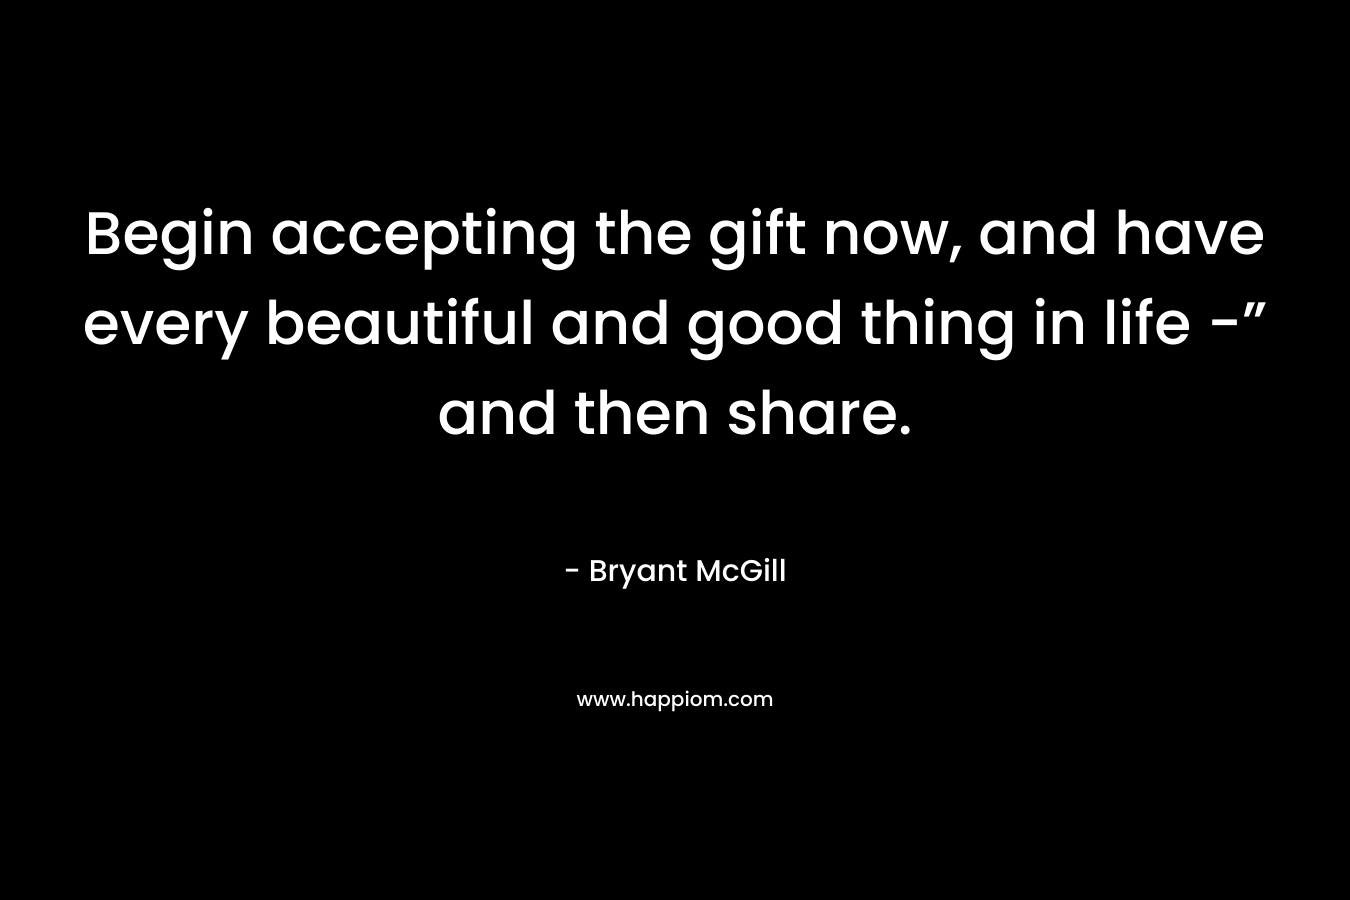 Begin accepting the gift now, and have every beautiful and good thing in life -” and then share.